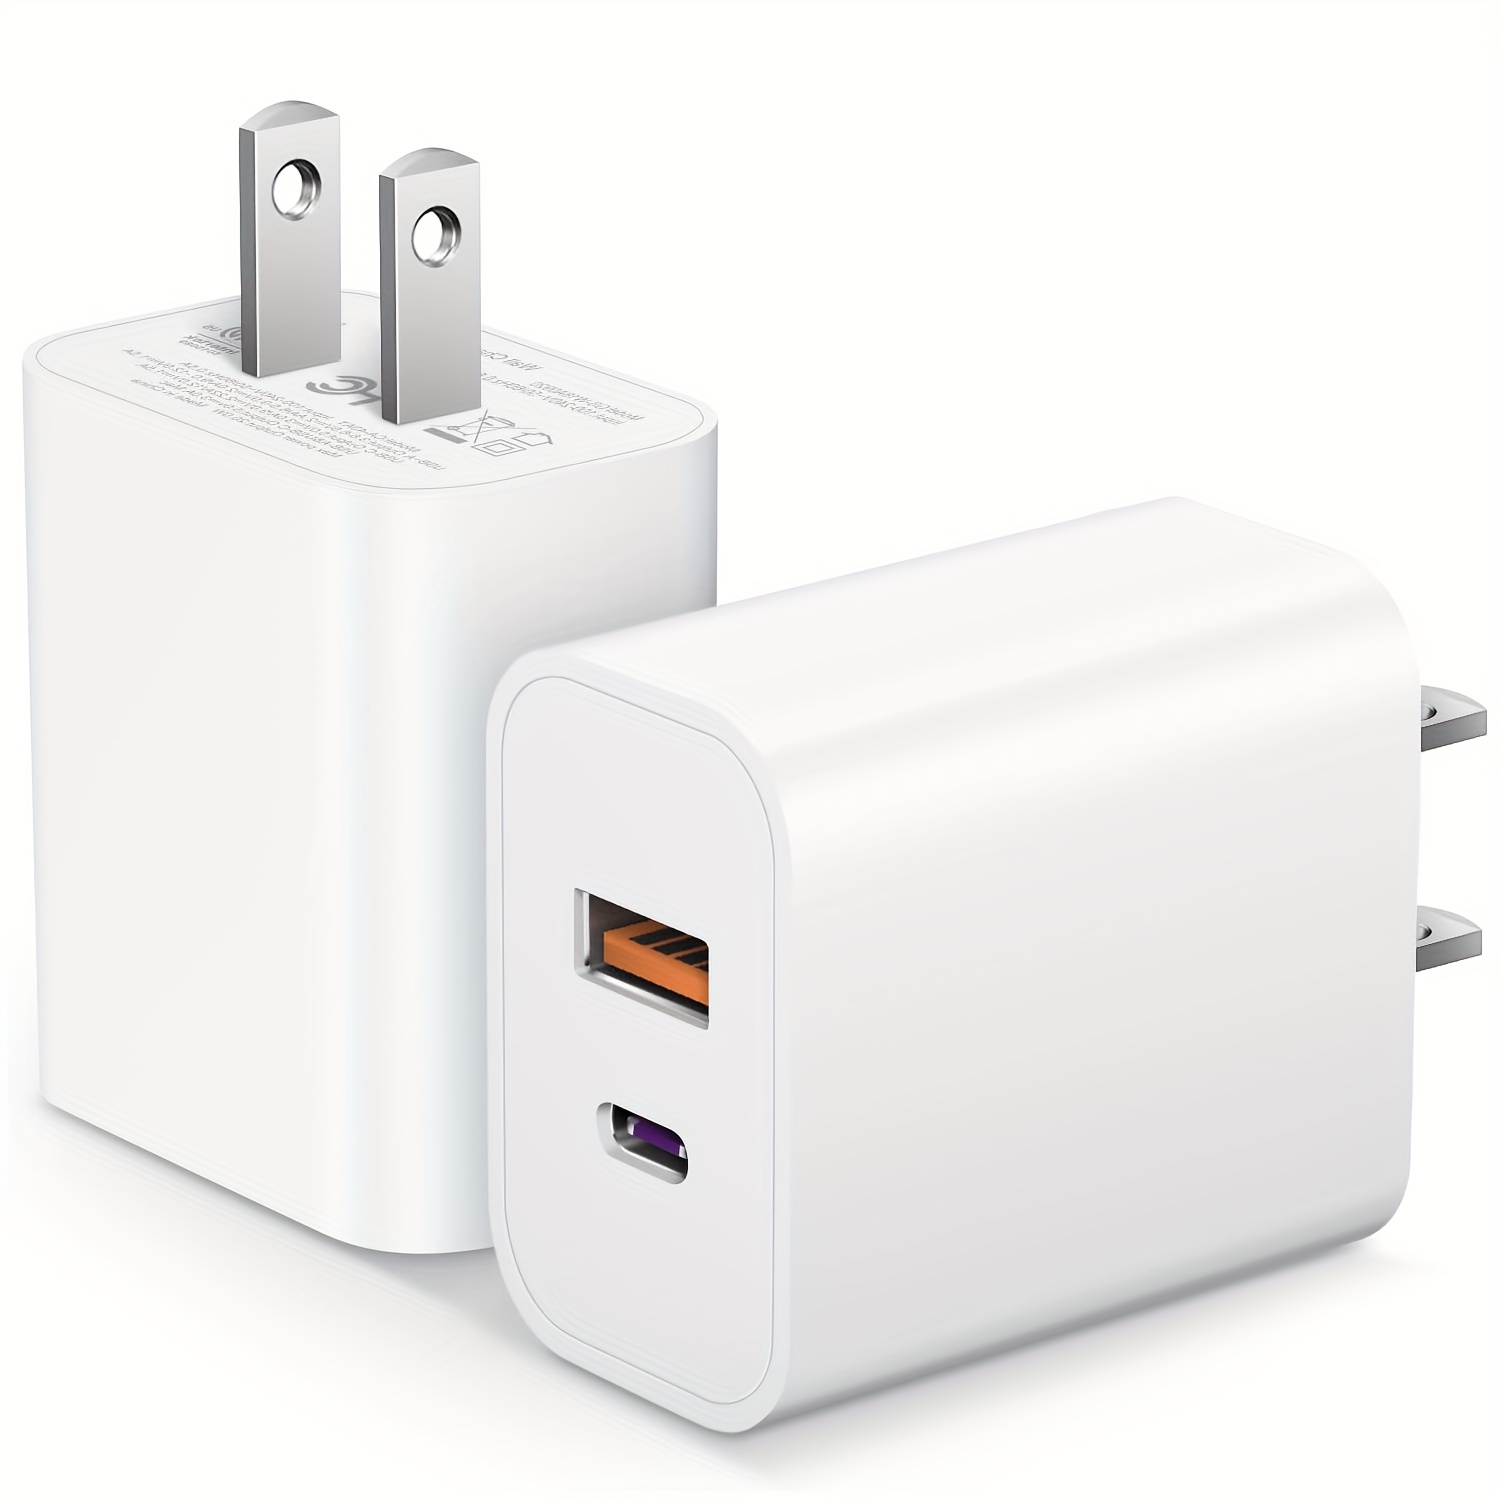 UGREEN 65W USB C Wall Charger - 2 Port PPS Fast Charger Adapter with  Foldable Plug Compatible for MacBook Pro/Air, iPad Pro, iPhone 12/12  Mini/12 Pro Max/XR/SE, Galaxy S21???? 20, Pixel 4/3